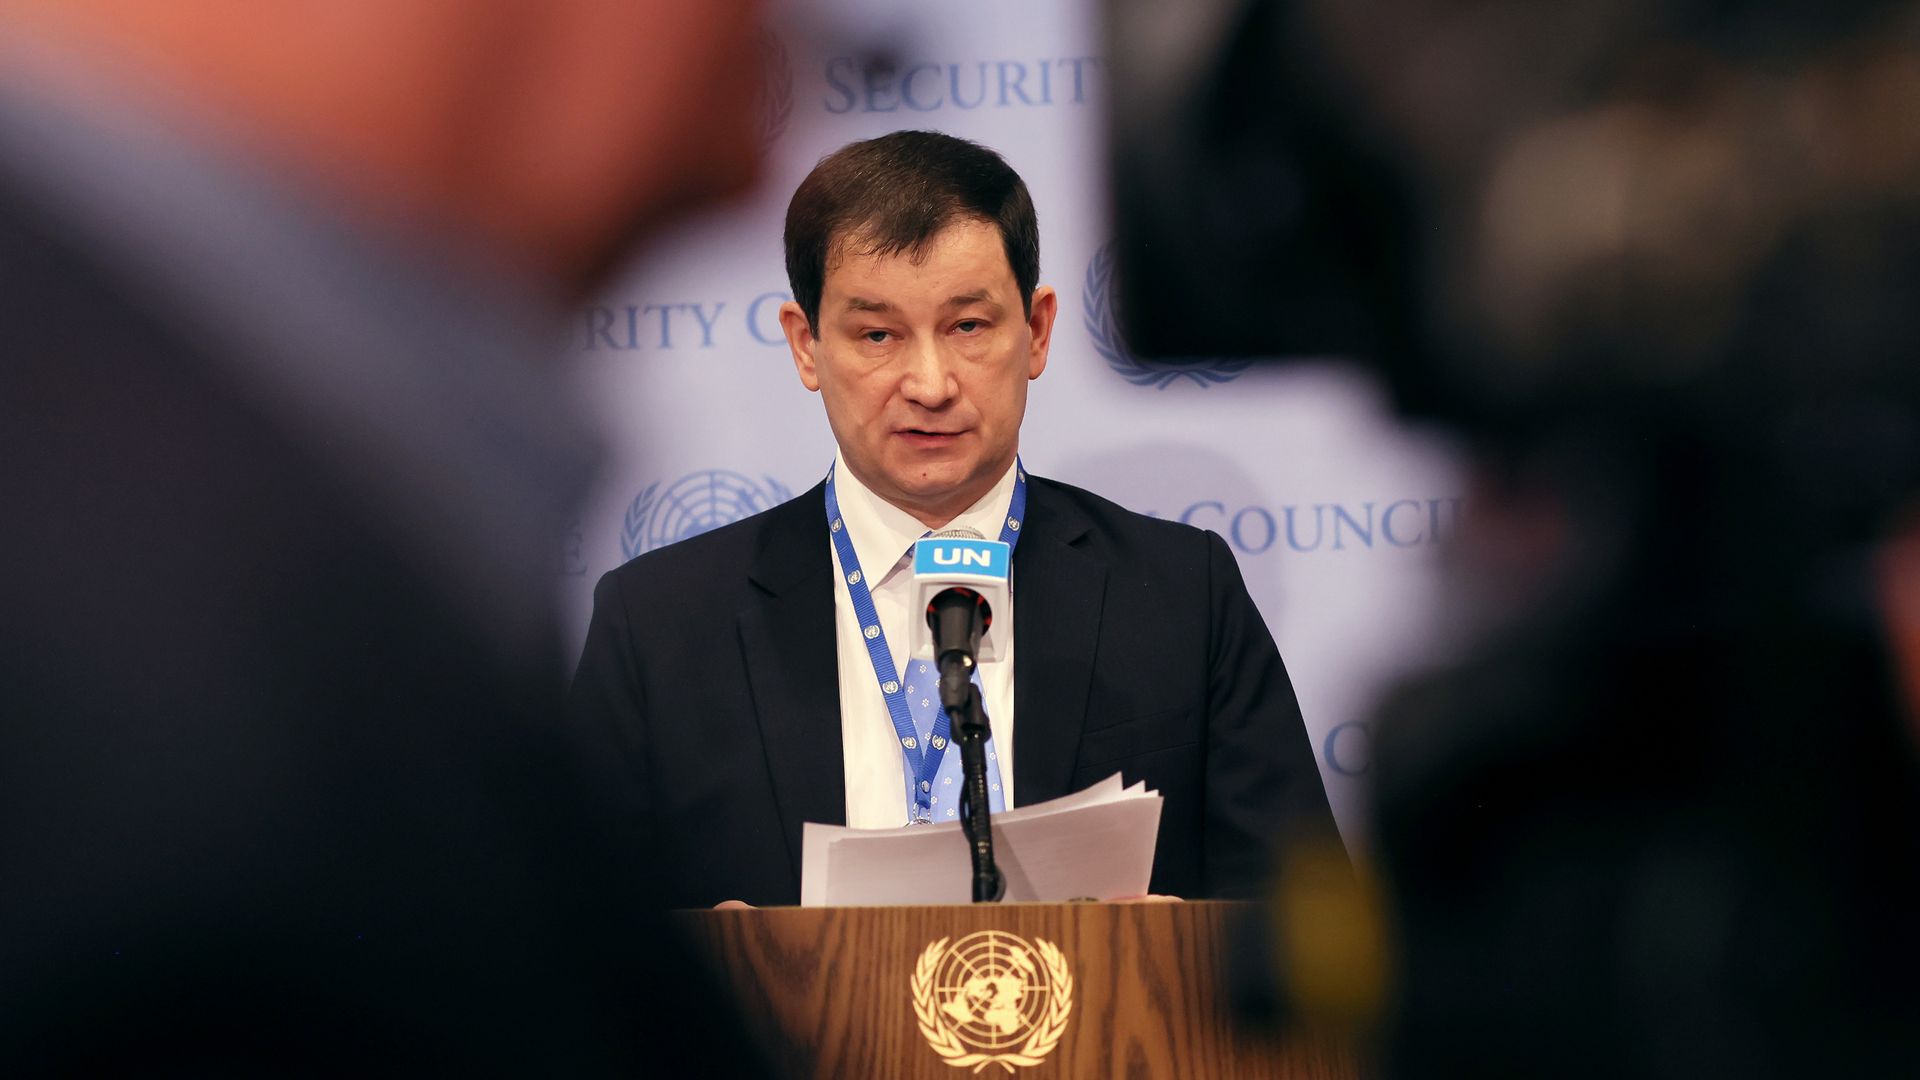  Dmitry Polyanskiy, First Deputy Permanent Representative of Russia speaks at a press conference ahead of the UN Security Council meeting at the United Nations on April 19, 2022 in New York City.